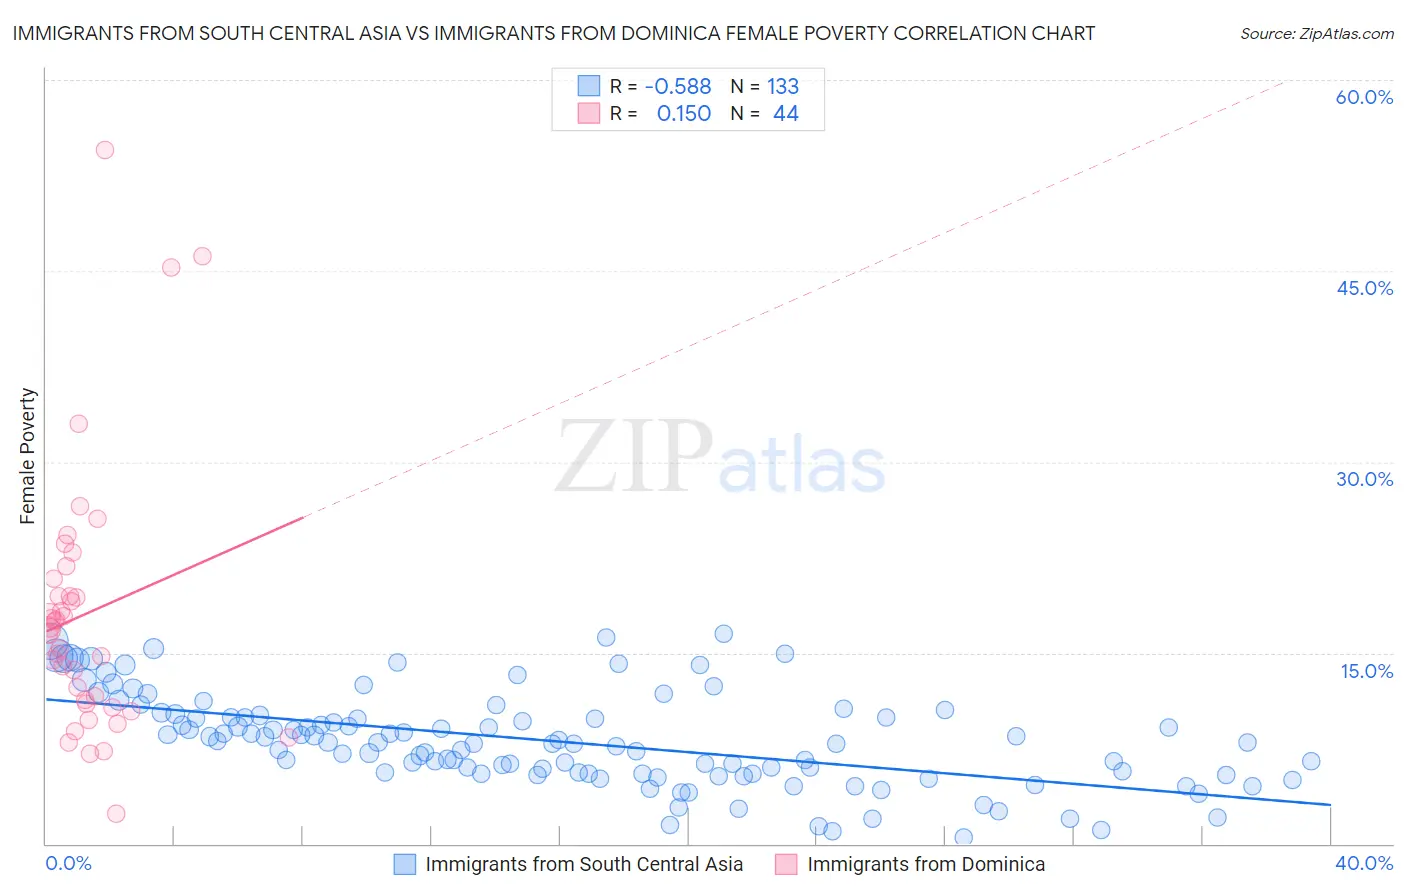 Immigrants from South Central Asia vs Immigrants from Dominica Female Poverty